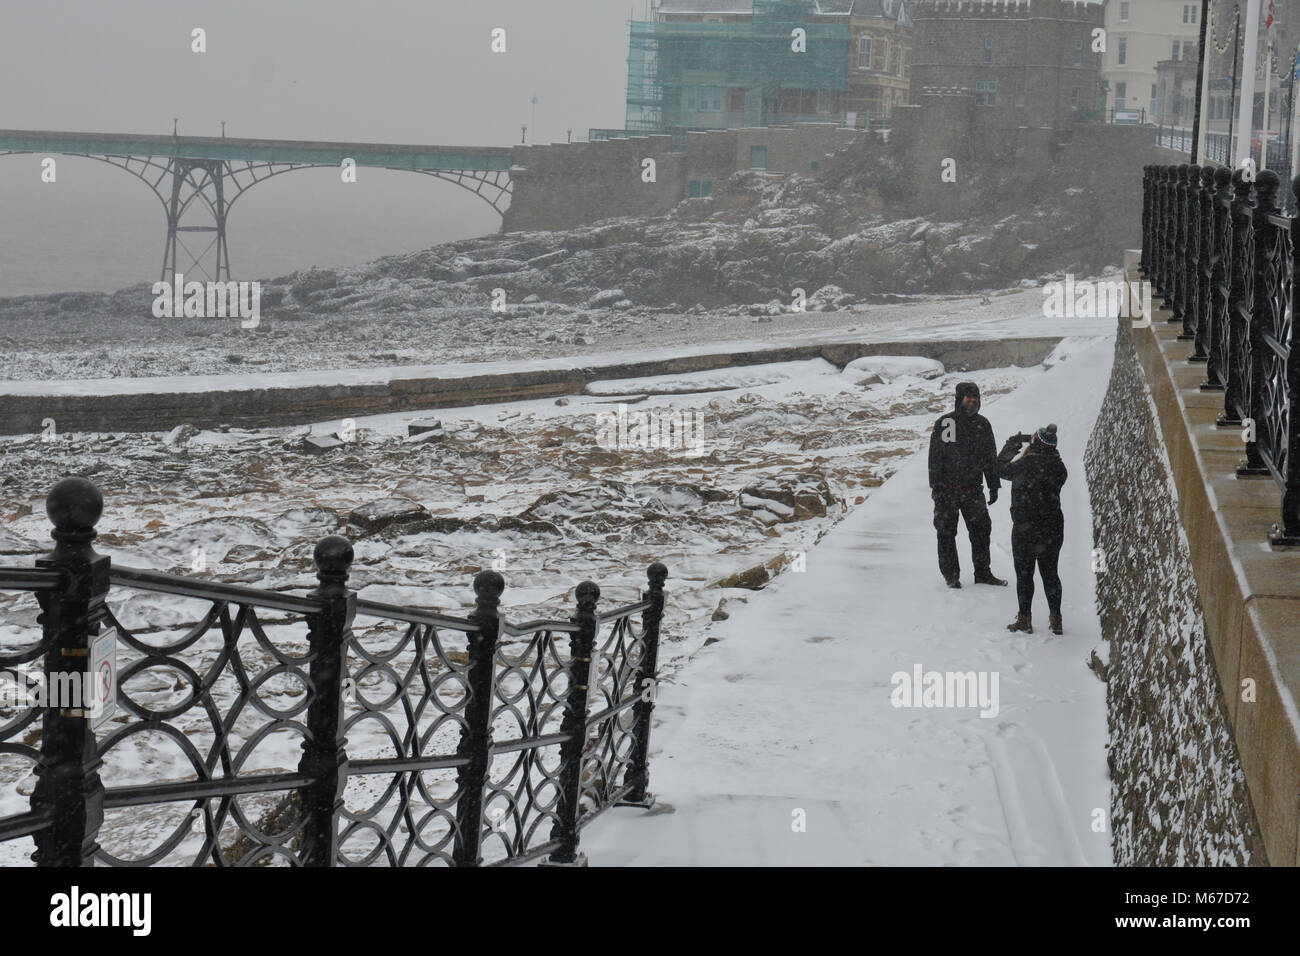 Clevedon Sea Front. 1st Mar, 2018. UK Weather: UK Weather Time for a Quick Photographh. Seafront at Clevedon during snow storm, with the arrival of Storm Emma 1 Hour away. Robert Timoney/Alamy/Live/news Credit: Robert Timoney/Alamy Live News Stock Photo